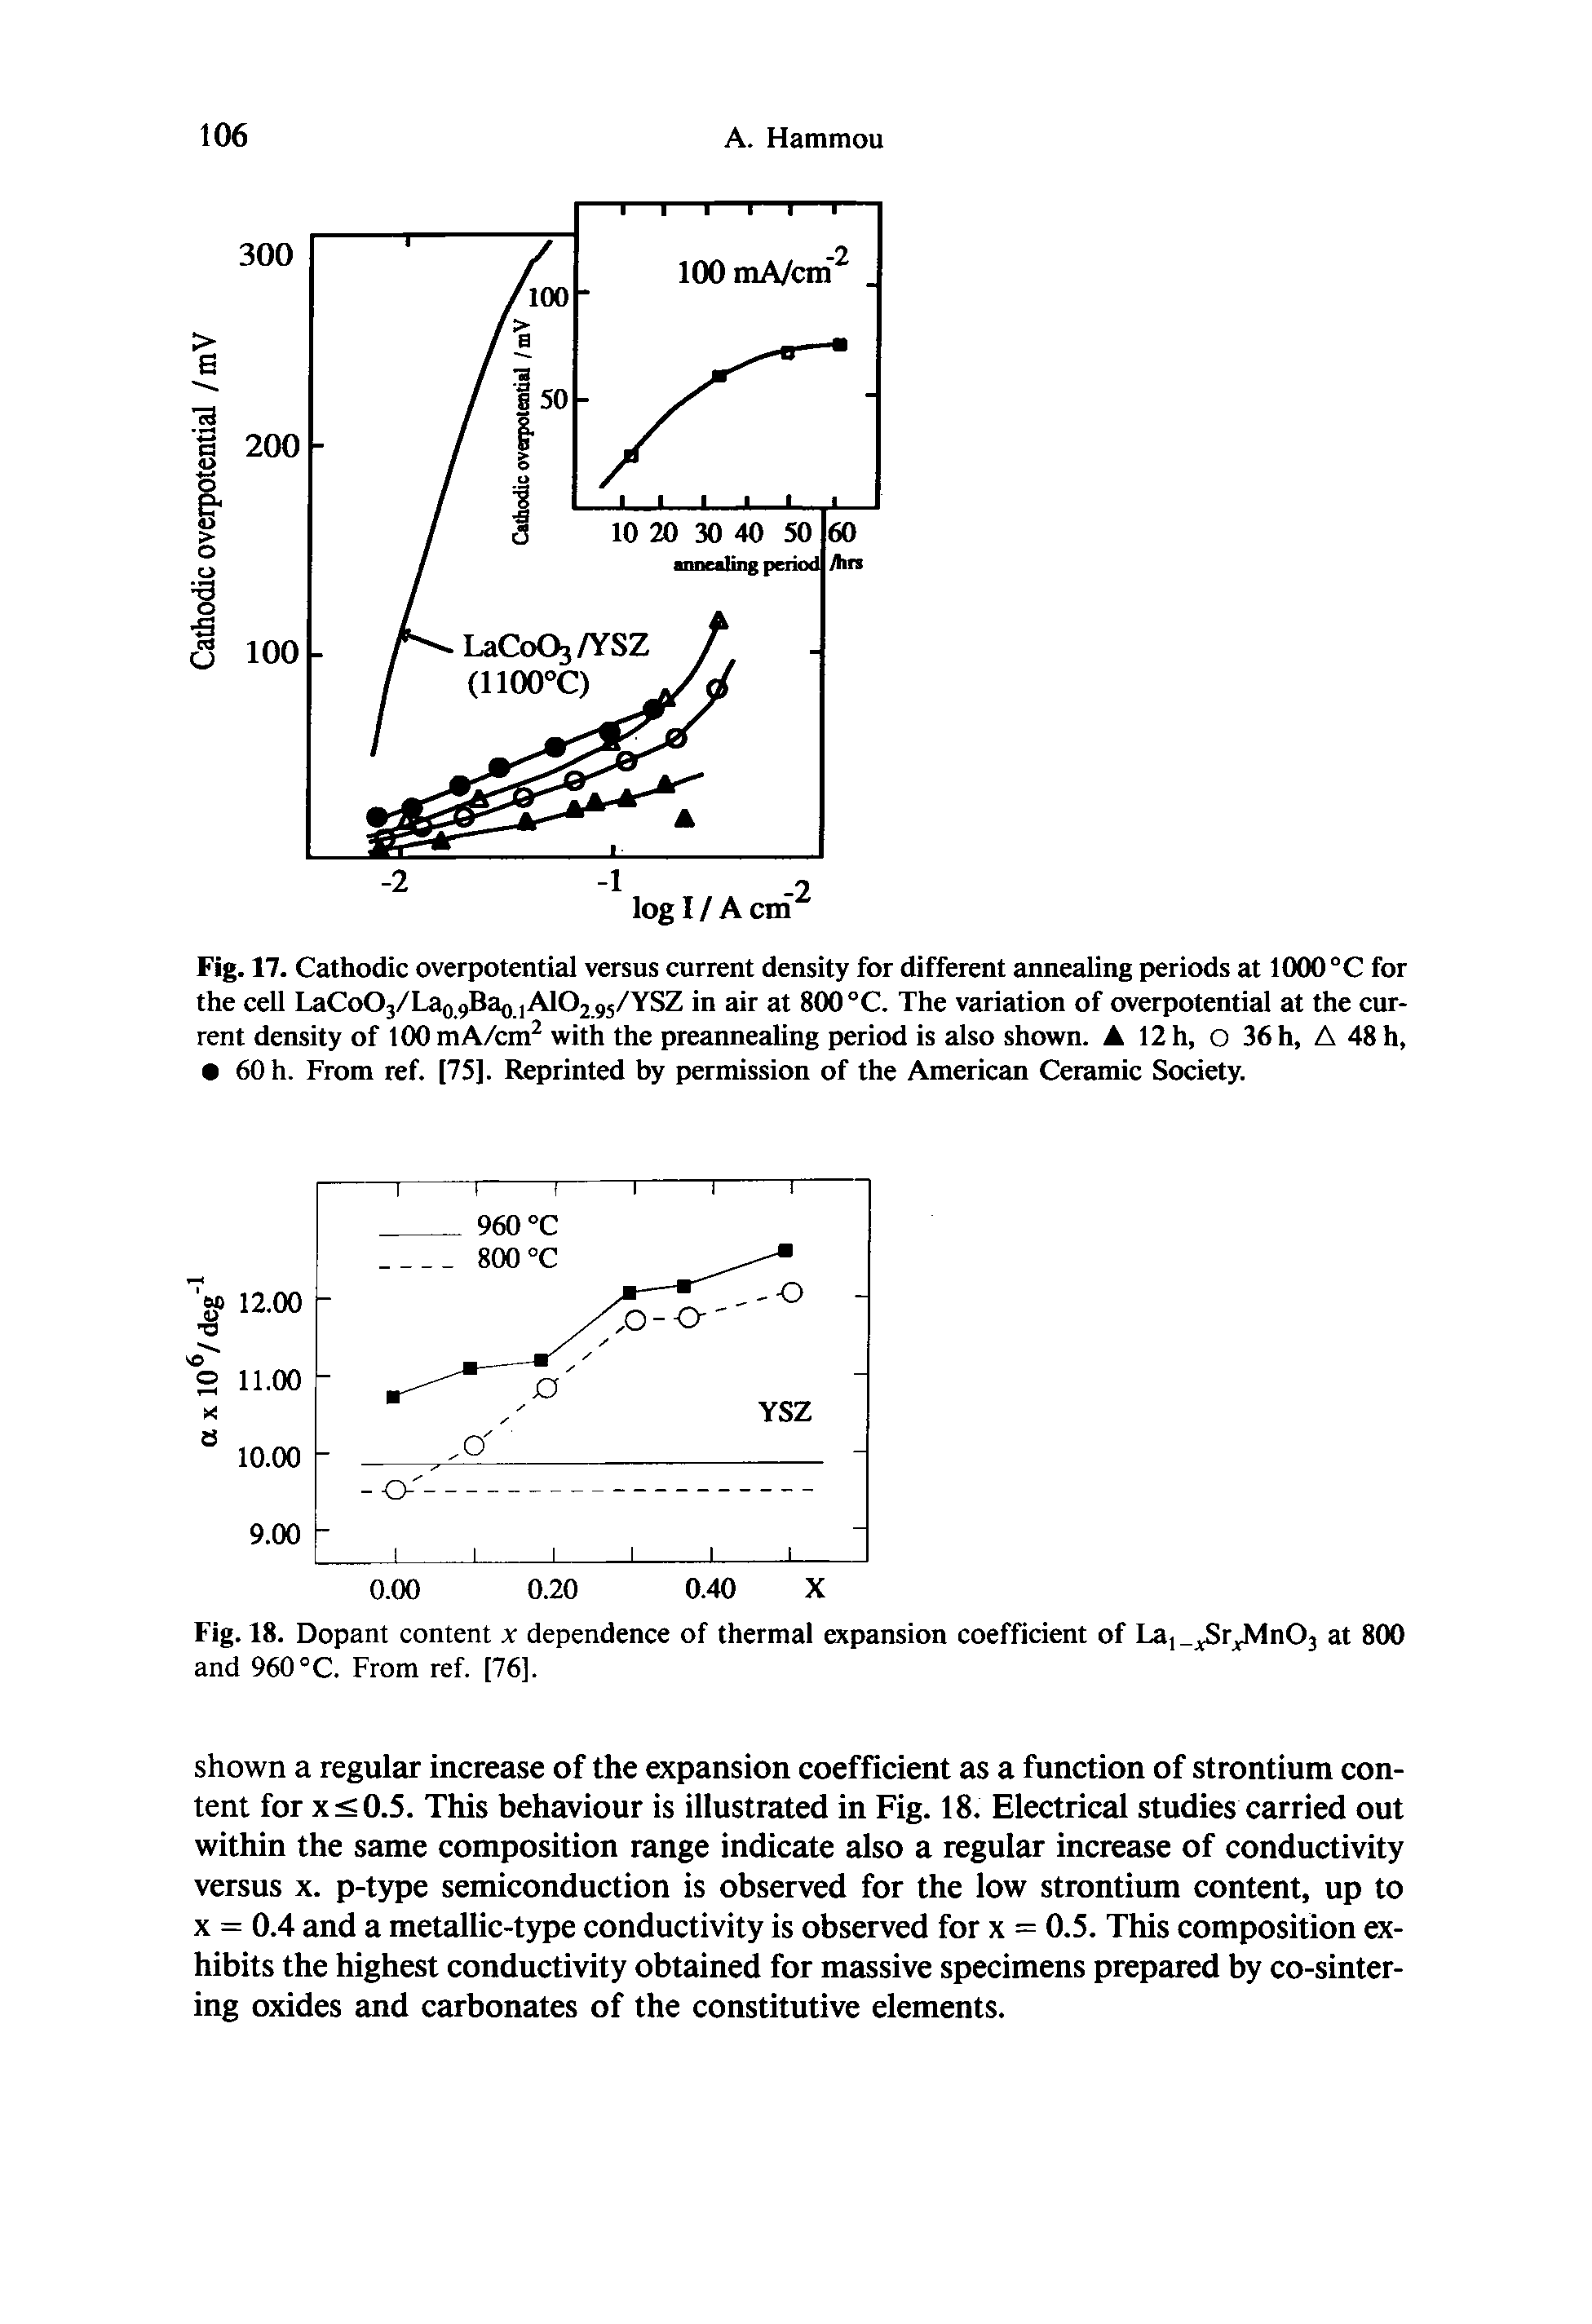 Fig. 17. Cathodic overpotential versus current density for different annealing periods at 1000 °C for the cell LaCoO3/La0 9Bao,AIO2.95/YSZ in air at 800 °C. The variation of overpotential at the current density of 100mA/cm2 with the preannealing period is also shown. A 12 h, o 36 h, A 48 h, 60 h. From ref. [75]. Reprinted by permission of the American Ceramic Society.